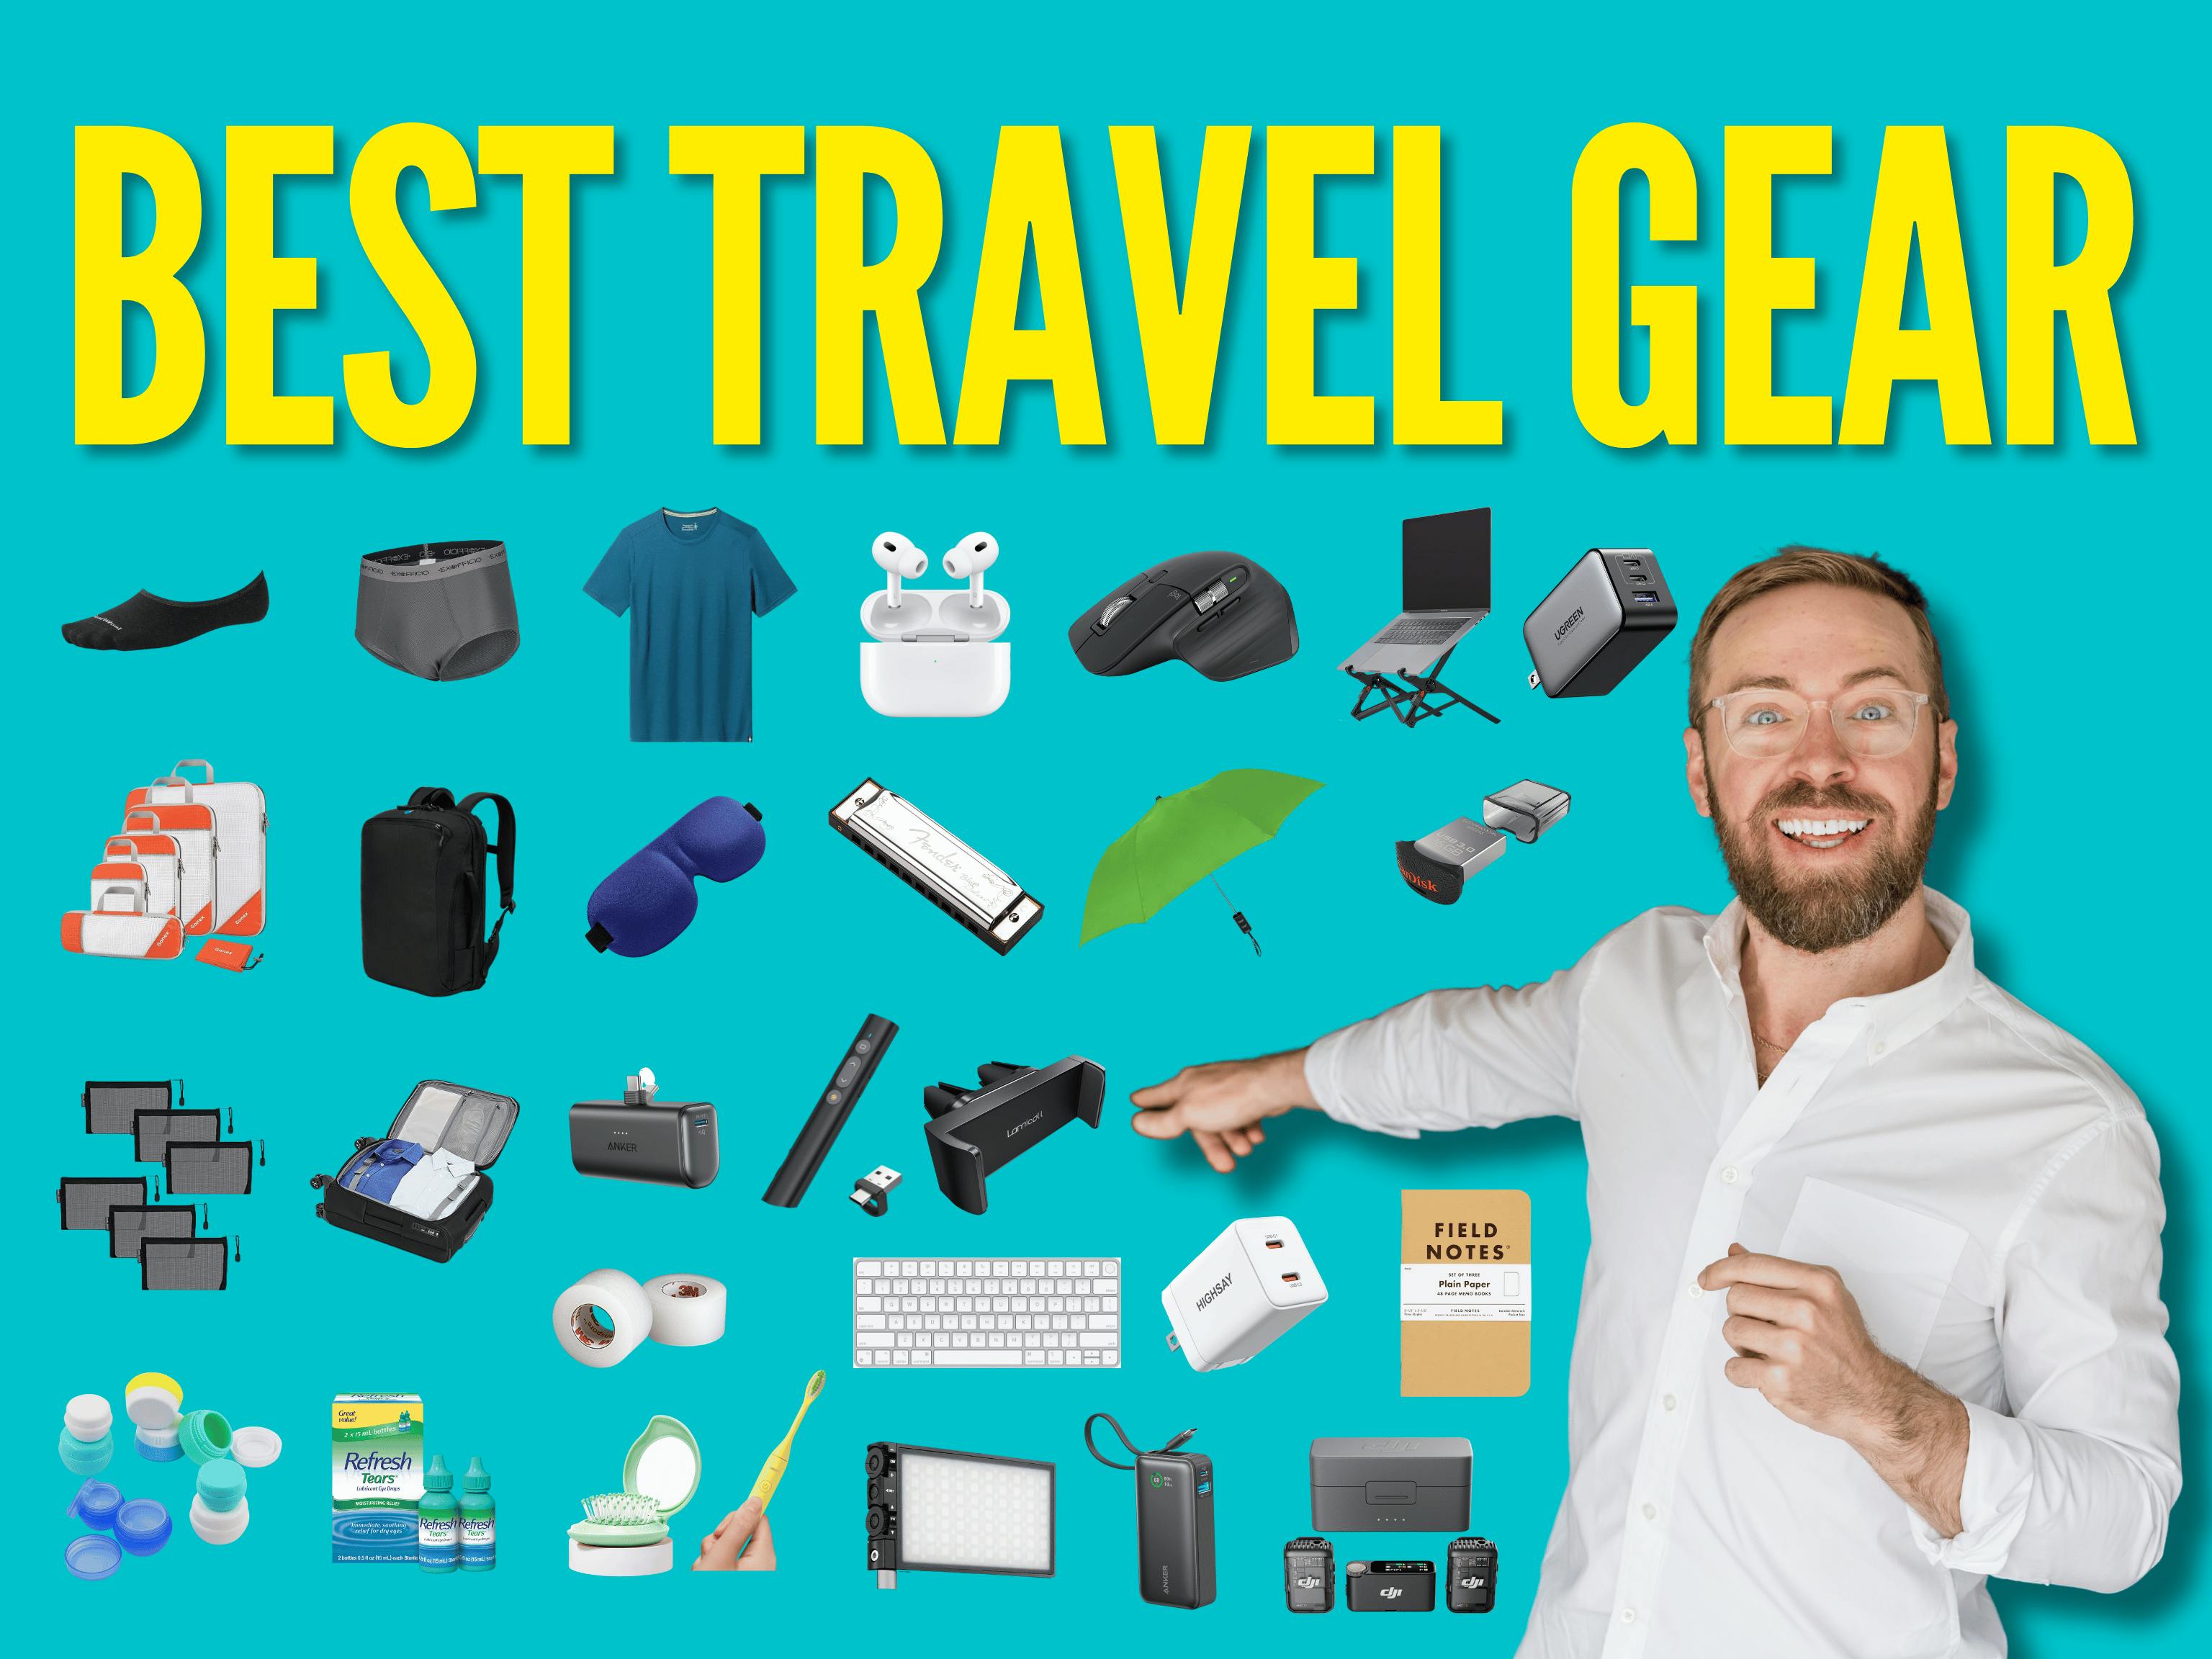 Header text: Best Travel Gear, and a headshot of Nick Gray pointing to all items in his travel gear